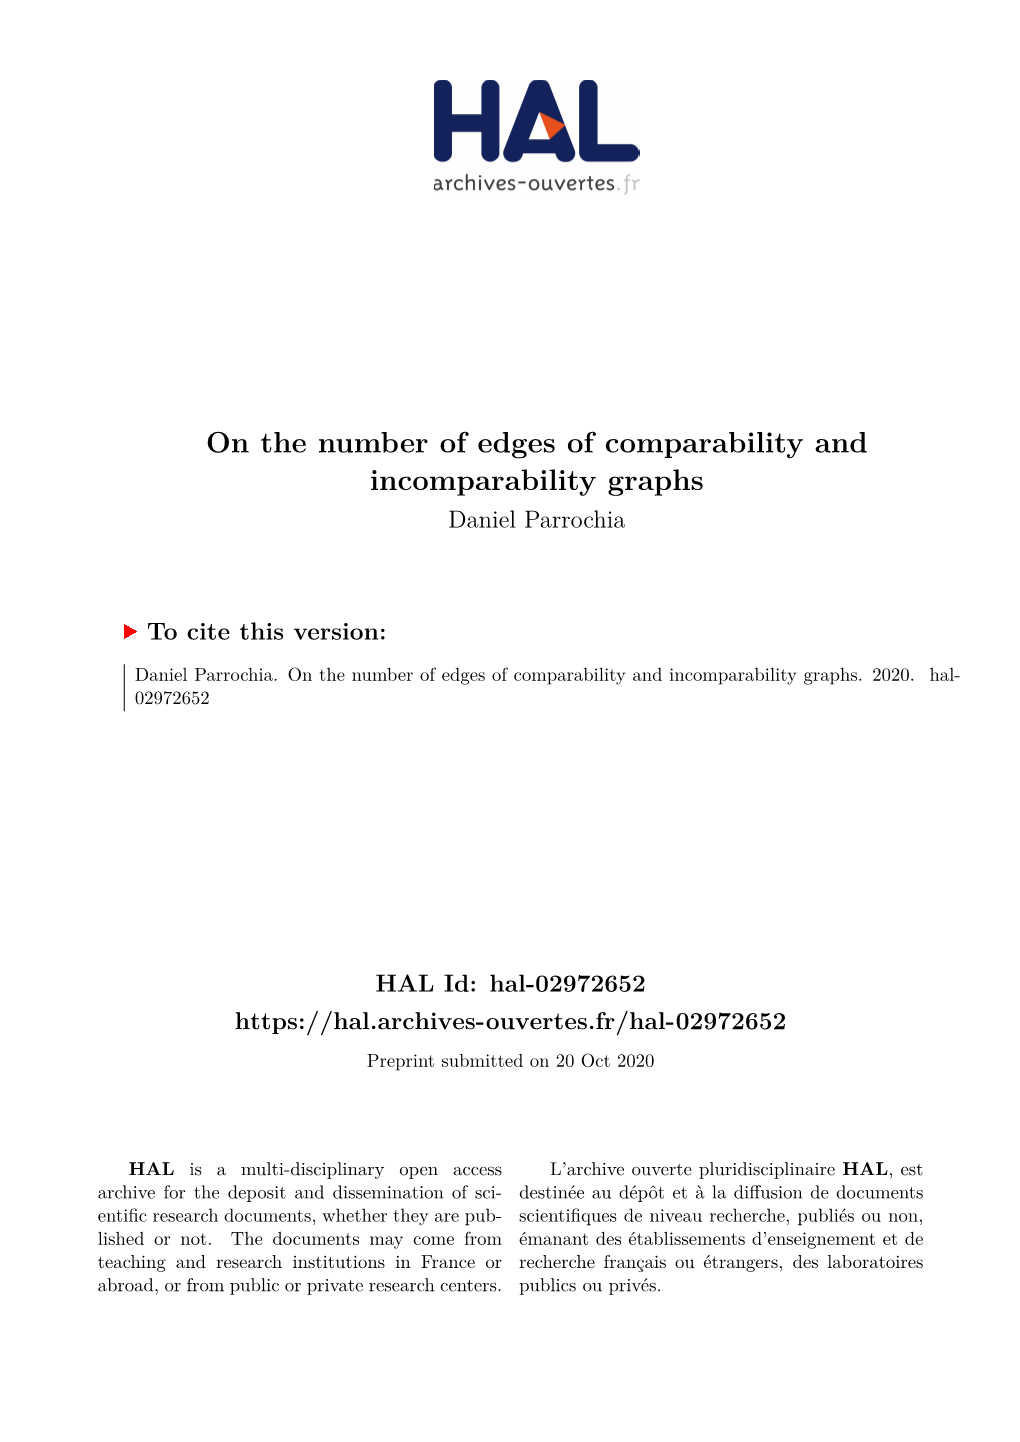 On the Number of Edges of Comparability and Incomparability Graphs Daniel Parrochia